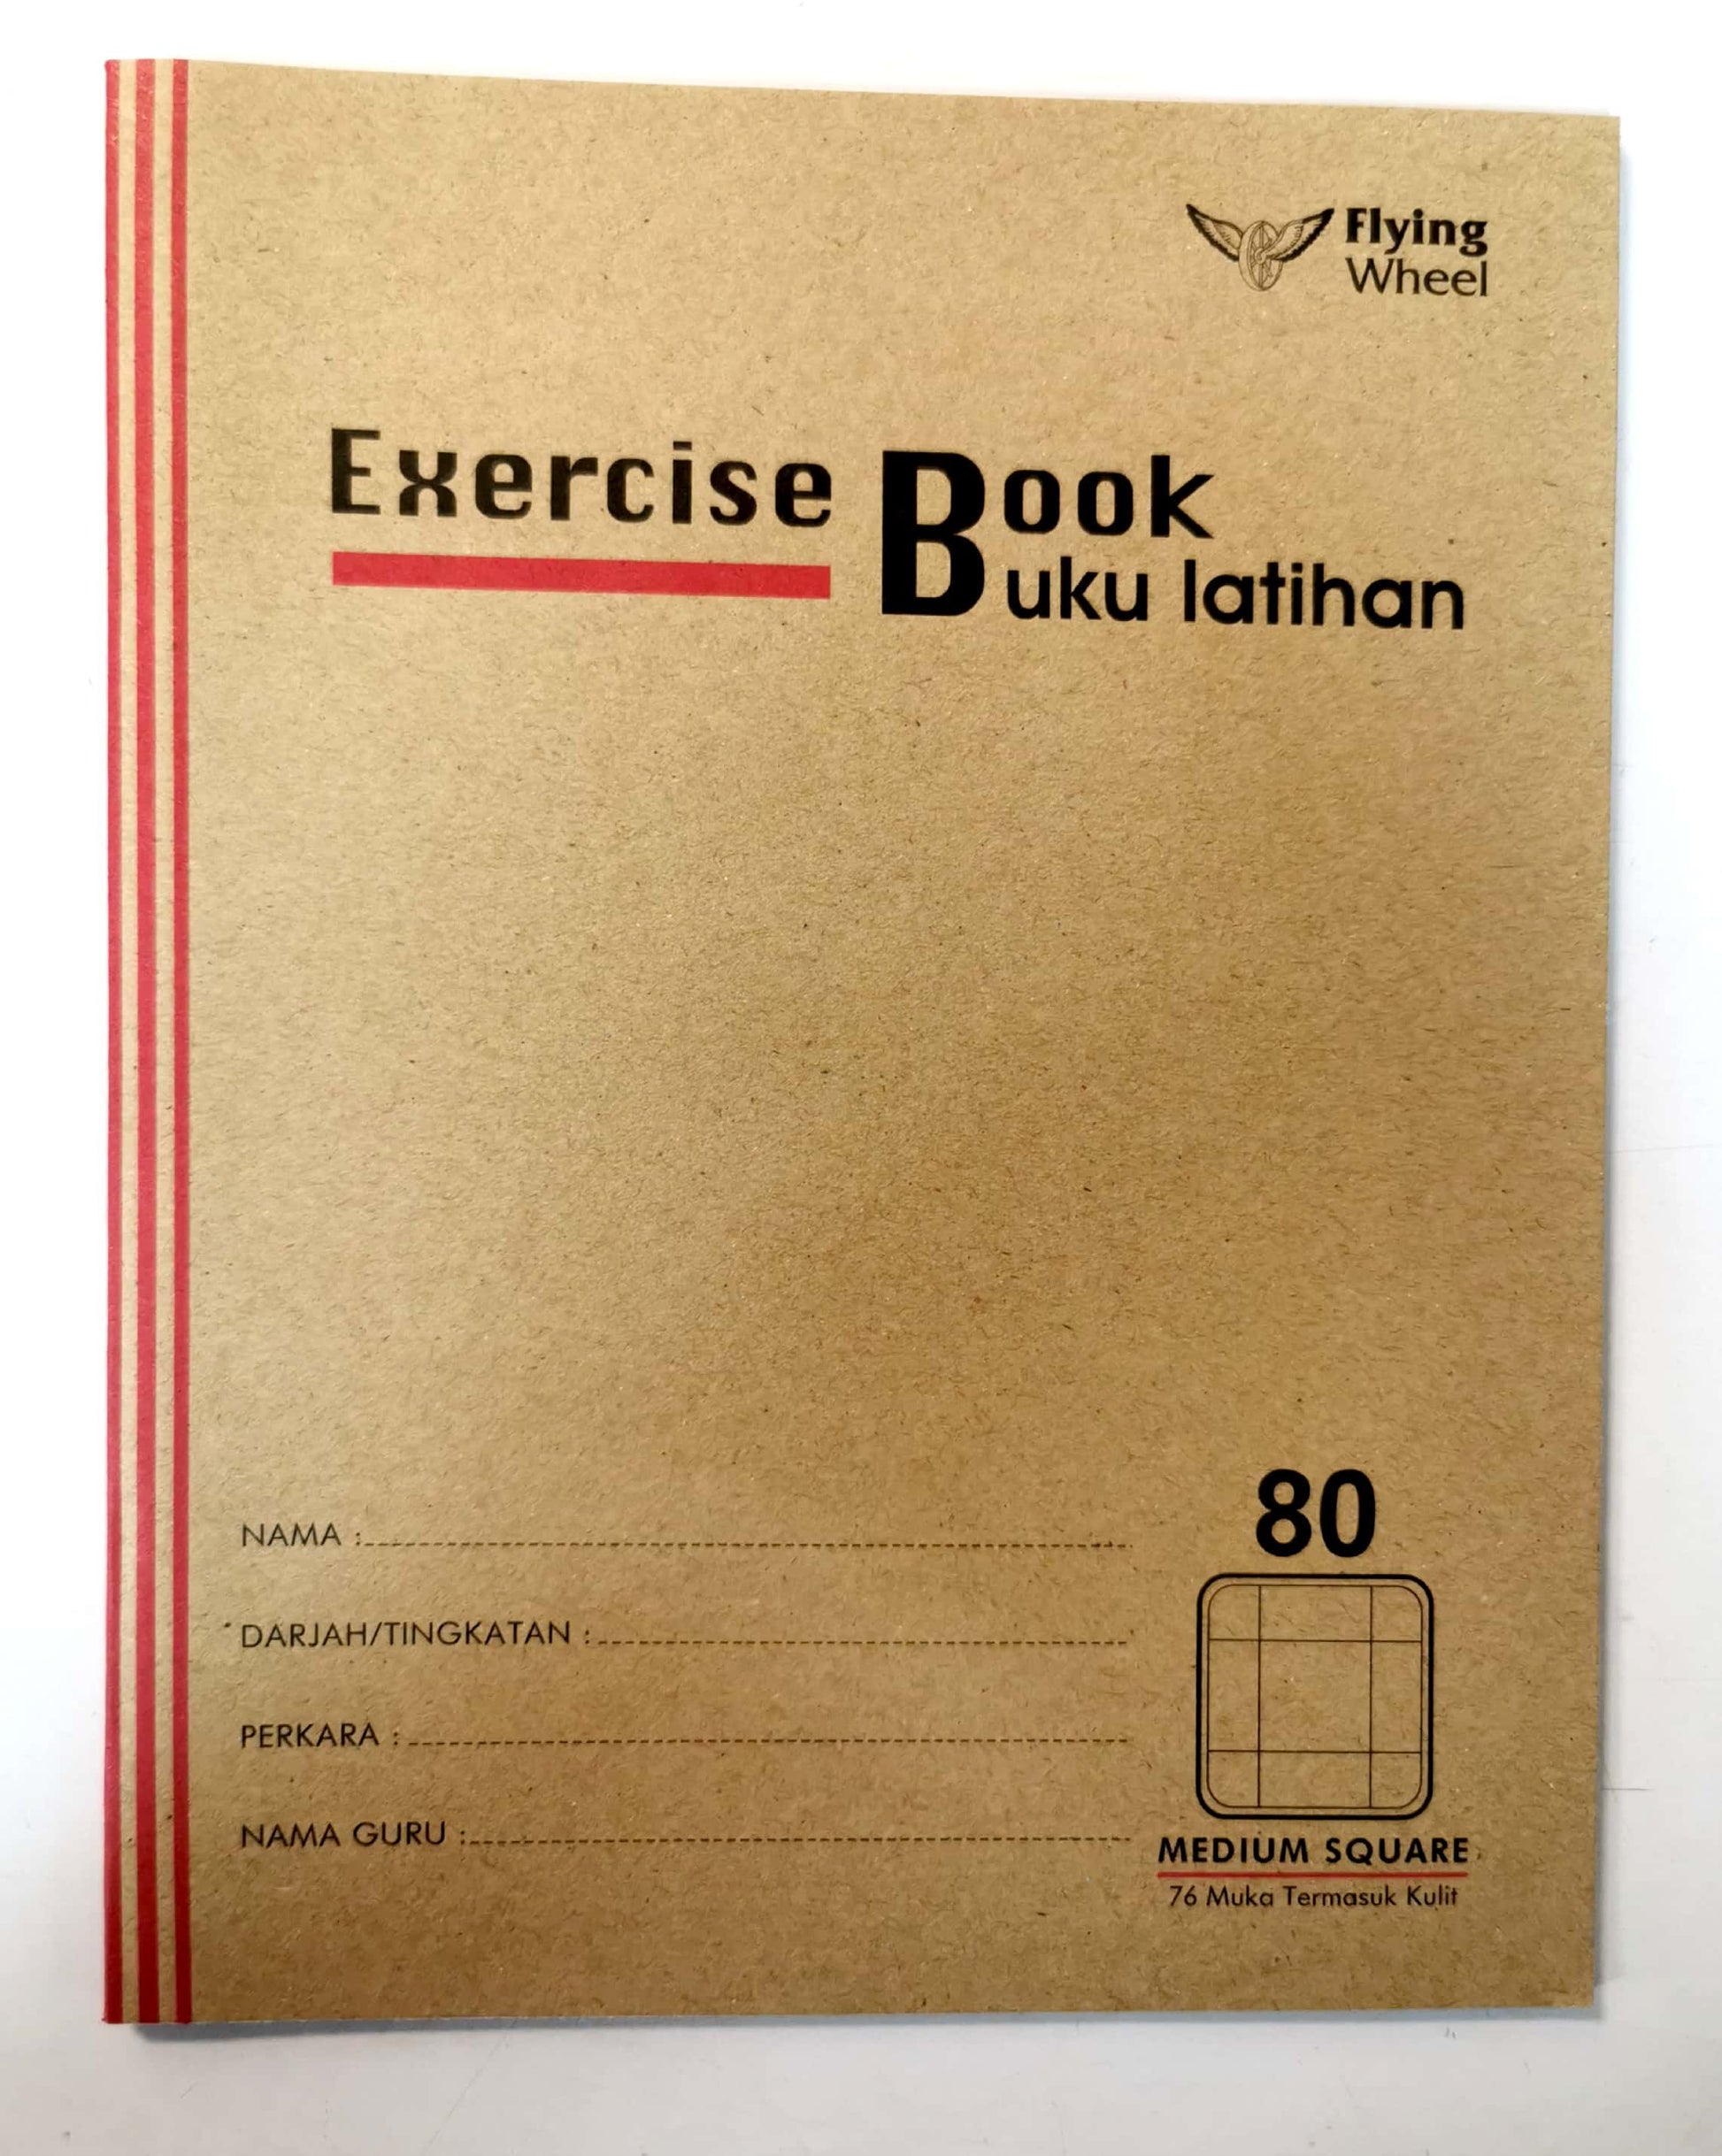 Flying Square Exercise Book Square - 80 pgs (RM 0.60 - RM 0.80) - OfficePlus